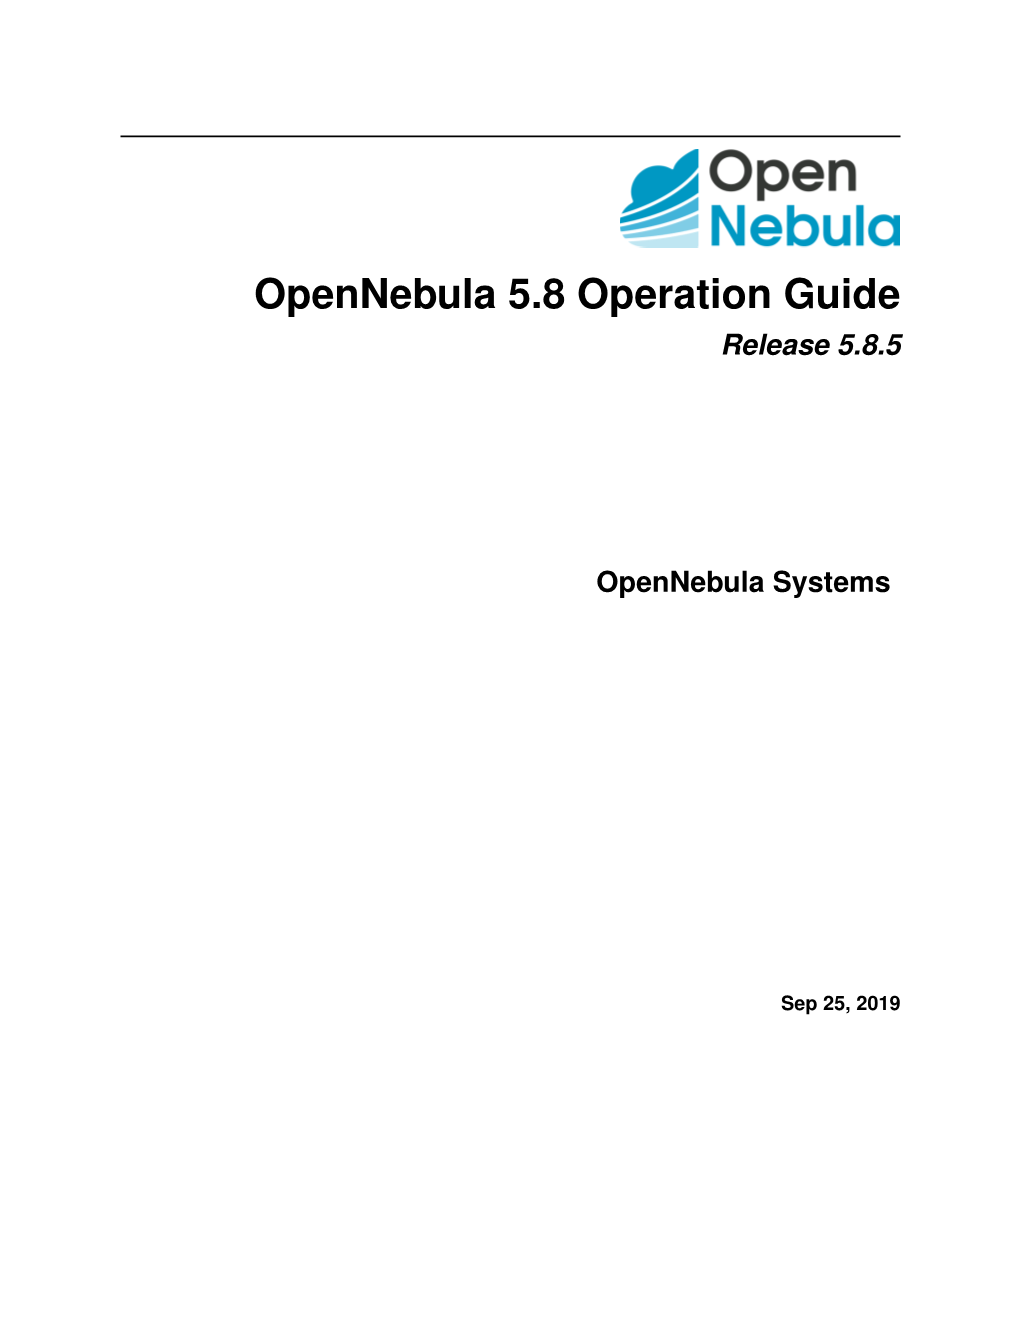 Opennebula 5.8 Operation Guide Release 5.8.5